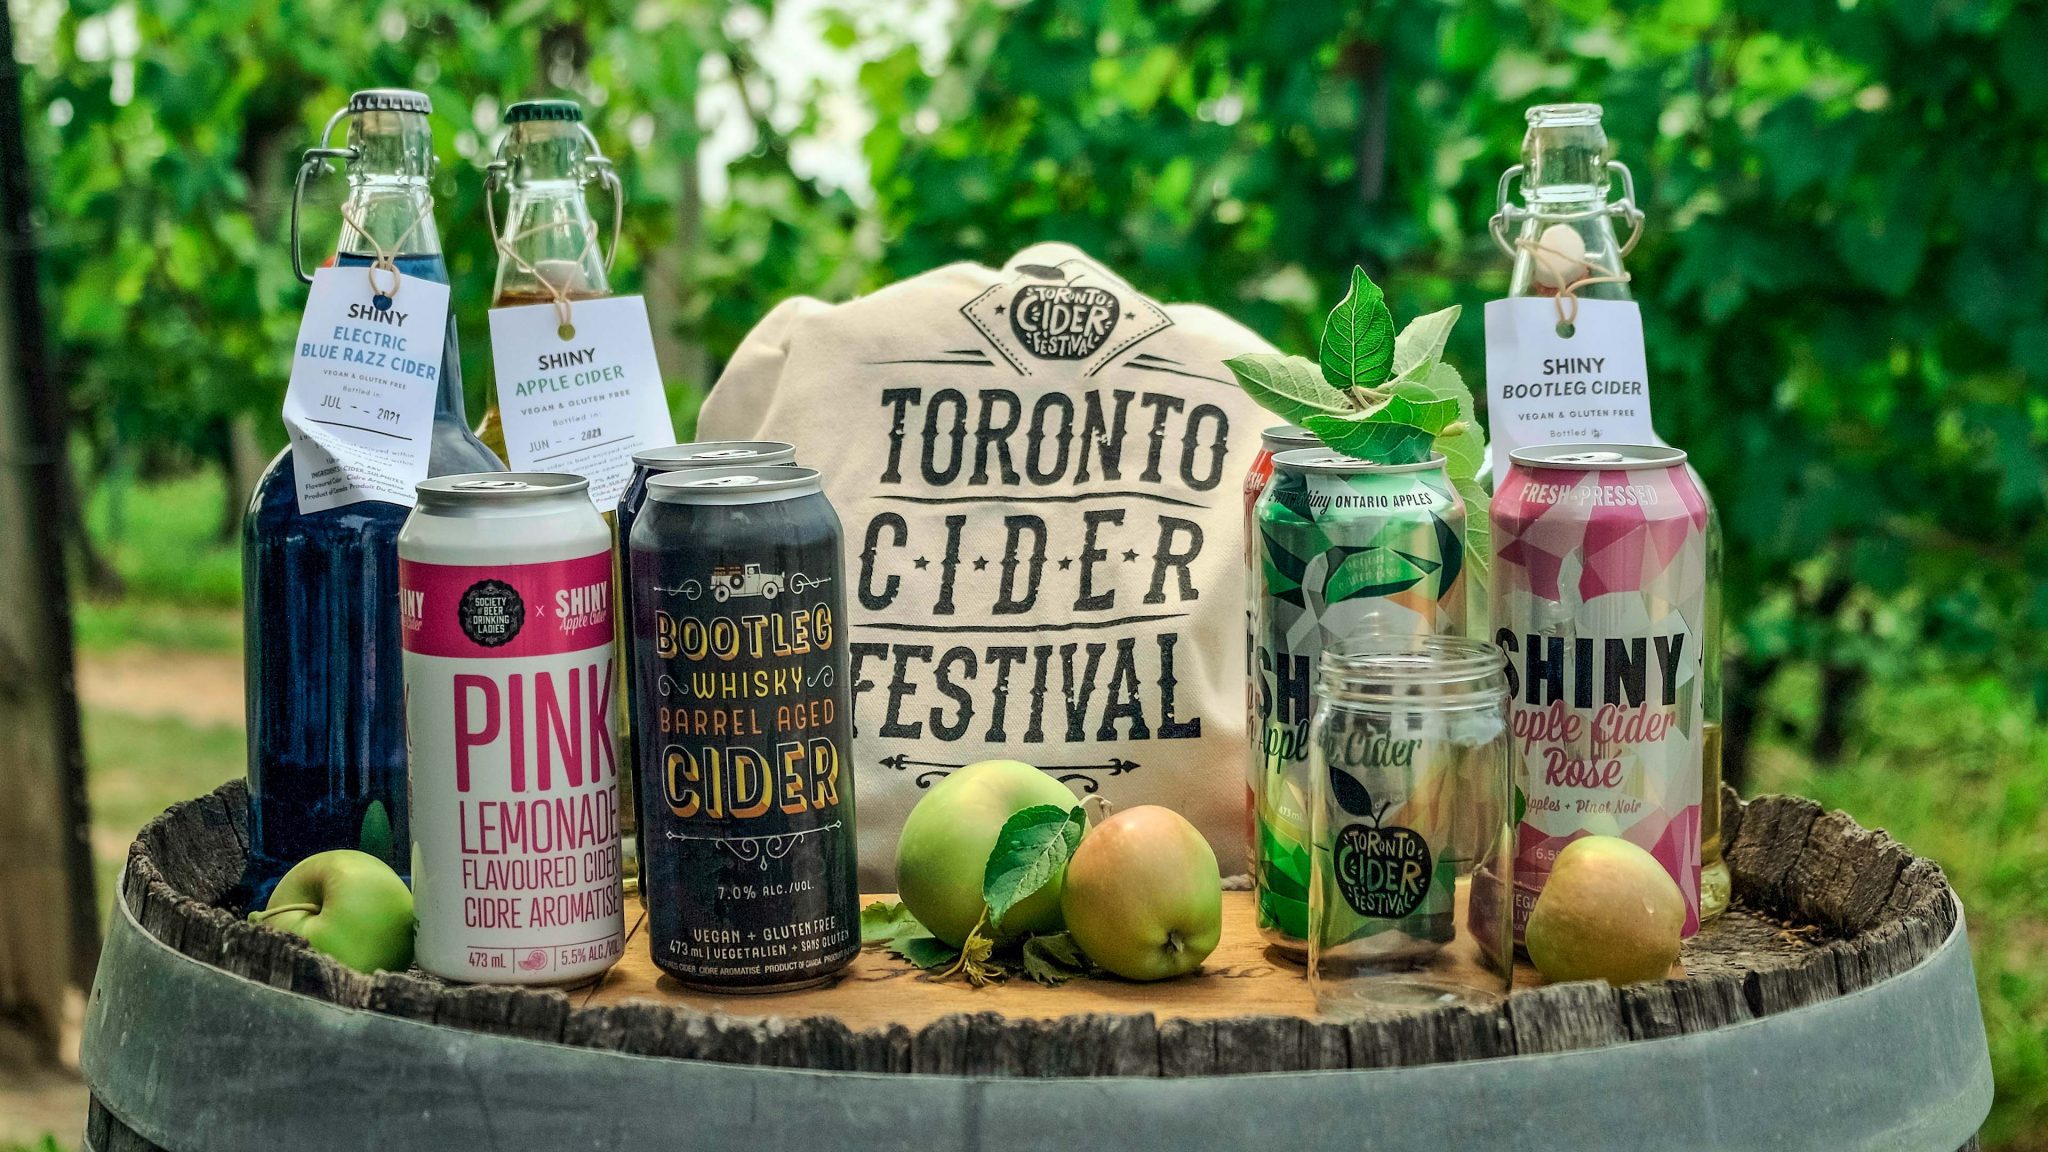 Toronto Cider Festival presents “The Road Trip” An outdoor cider and